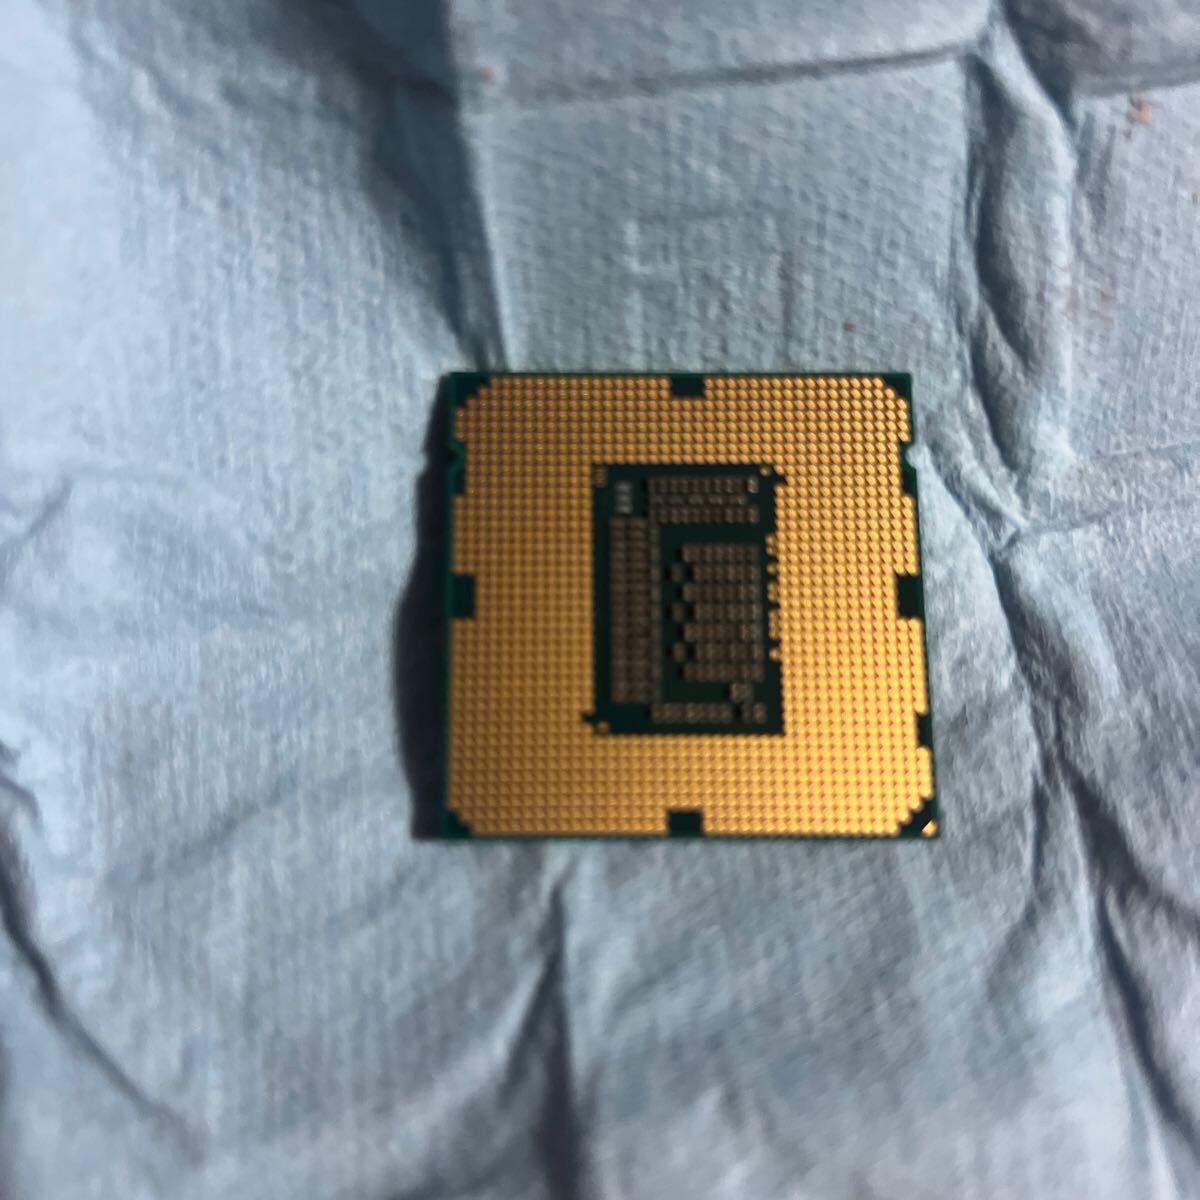 Intel Core CPU i7-3770 3.40ghz chip personal computer PCge-mingPC game Intel used 